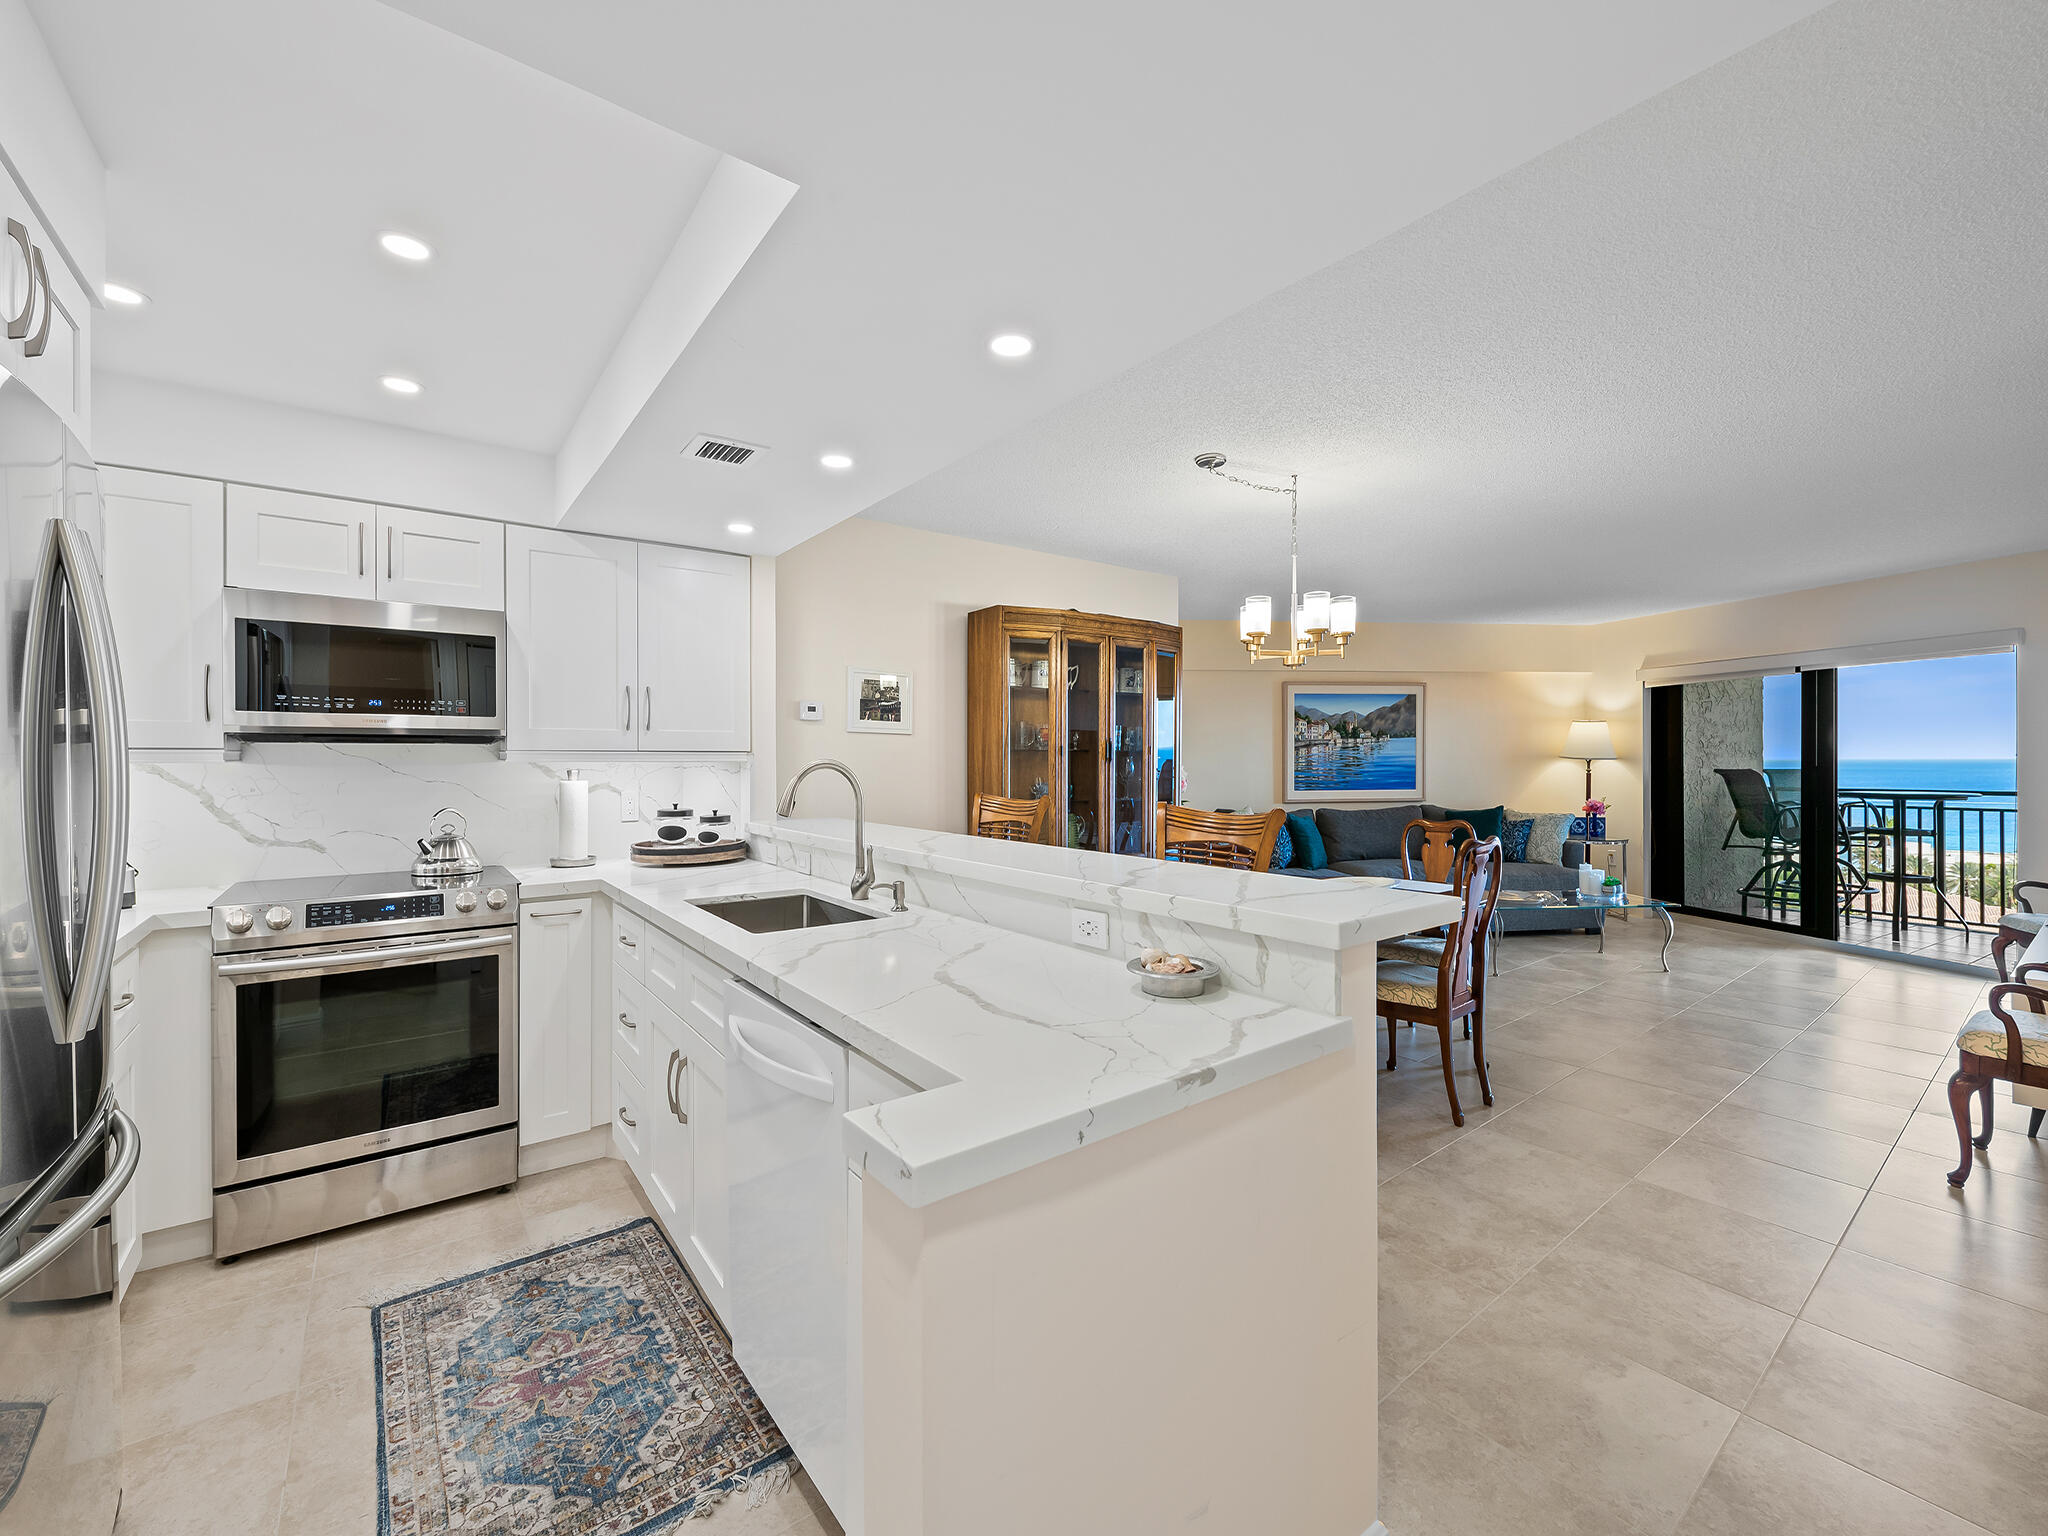 a large white kitchen with stainless steel appliances lots of counter top space and furniture